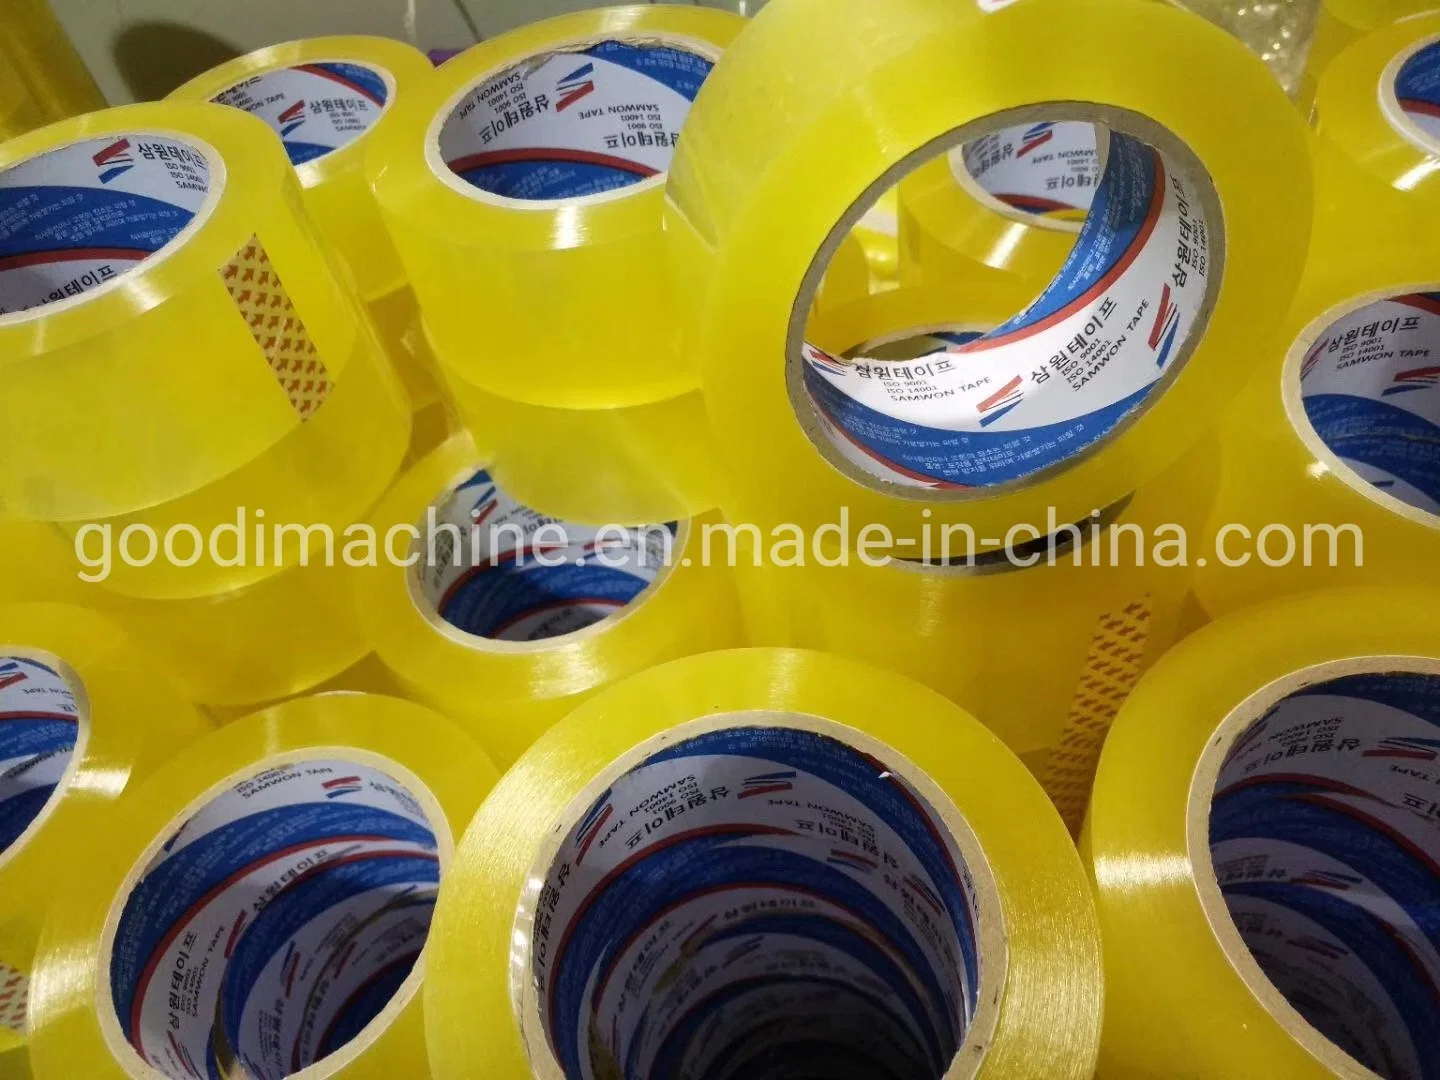 Adhesive BOPP Cello Tape Making Machine Automatic Tape Production Line